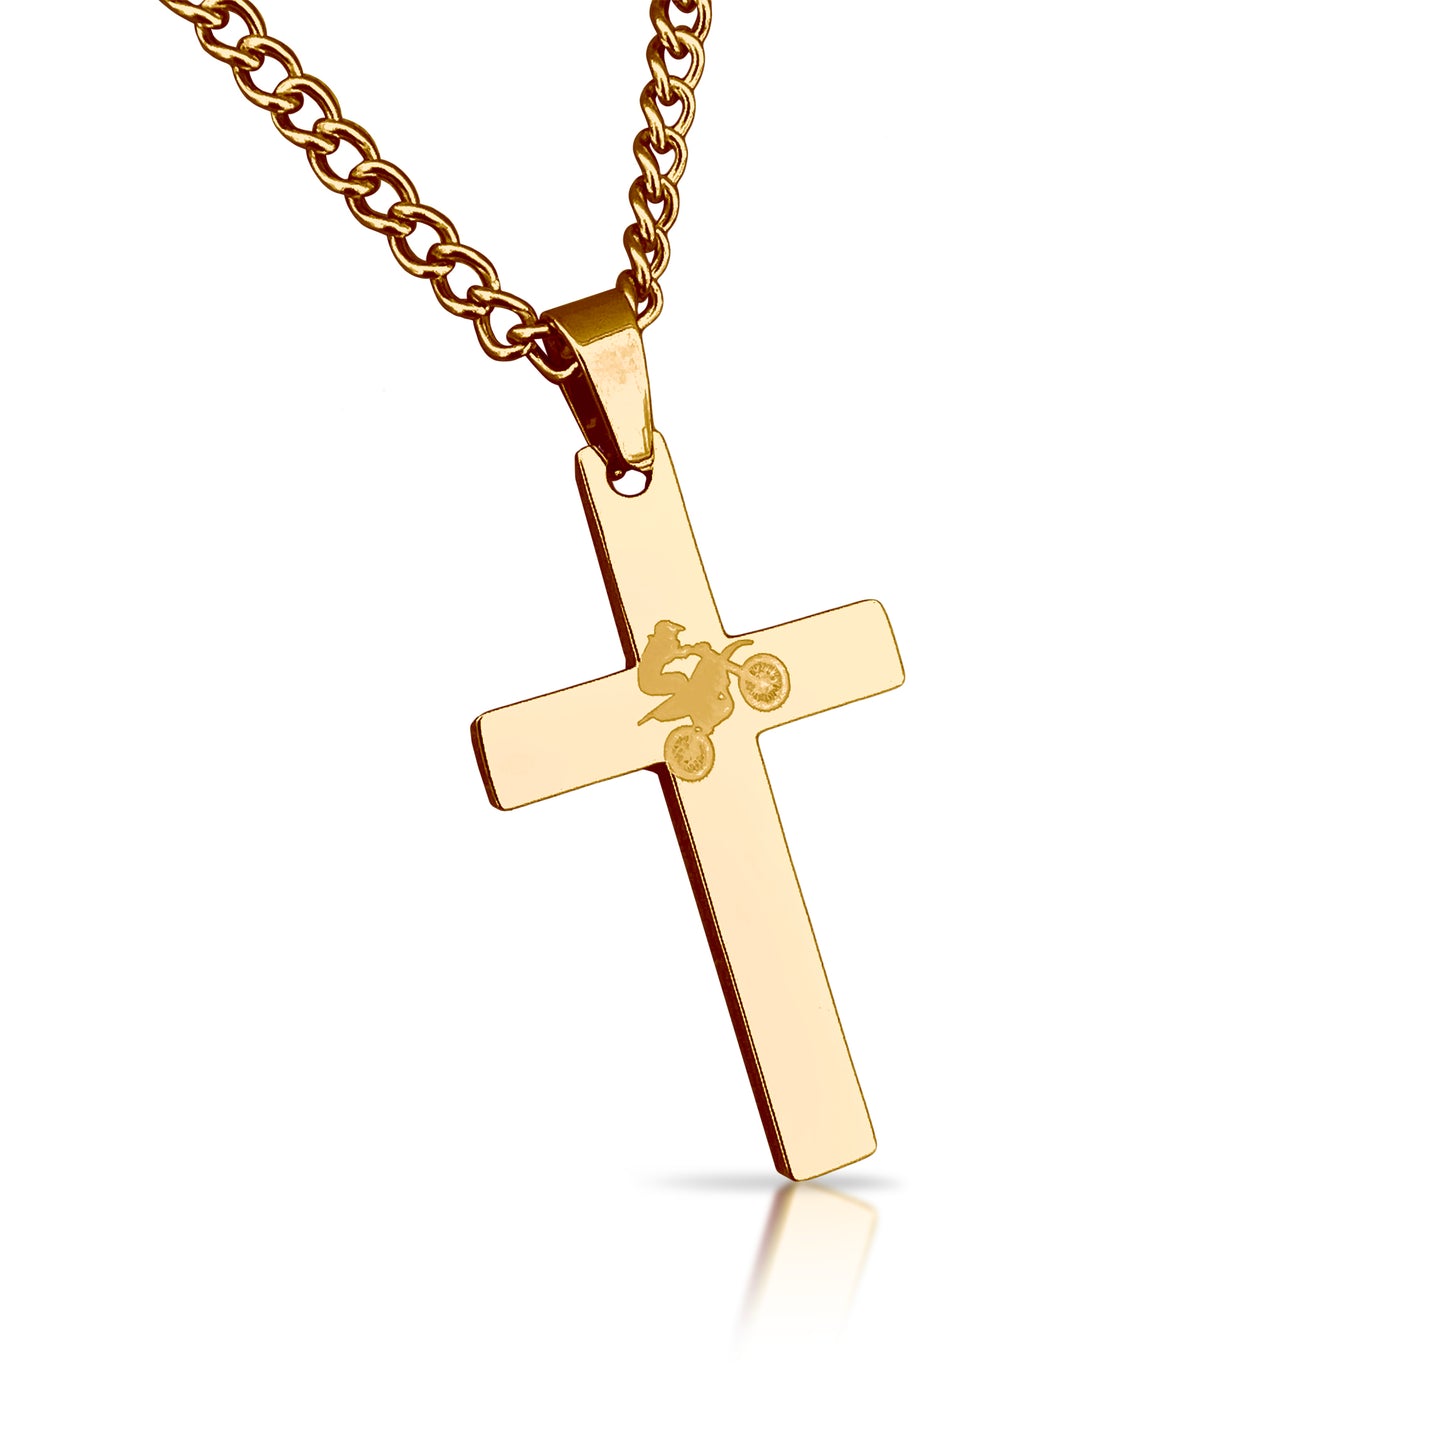 Motocross Cross Pendant With Chain Necklace - 14K Gold Plated Stainless Steel